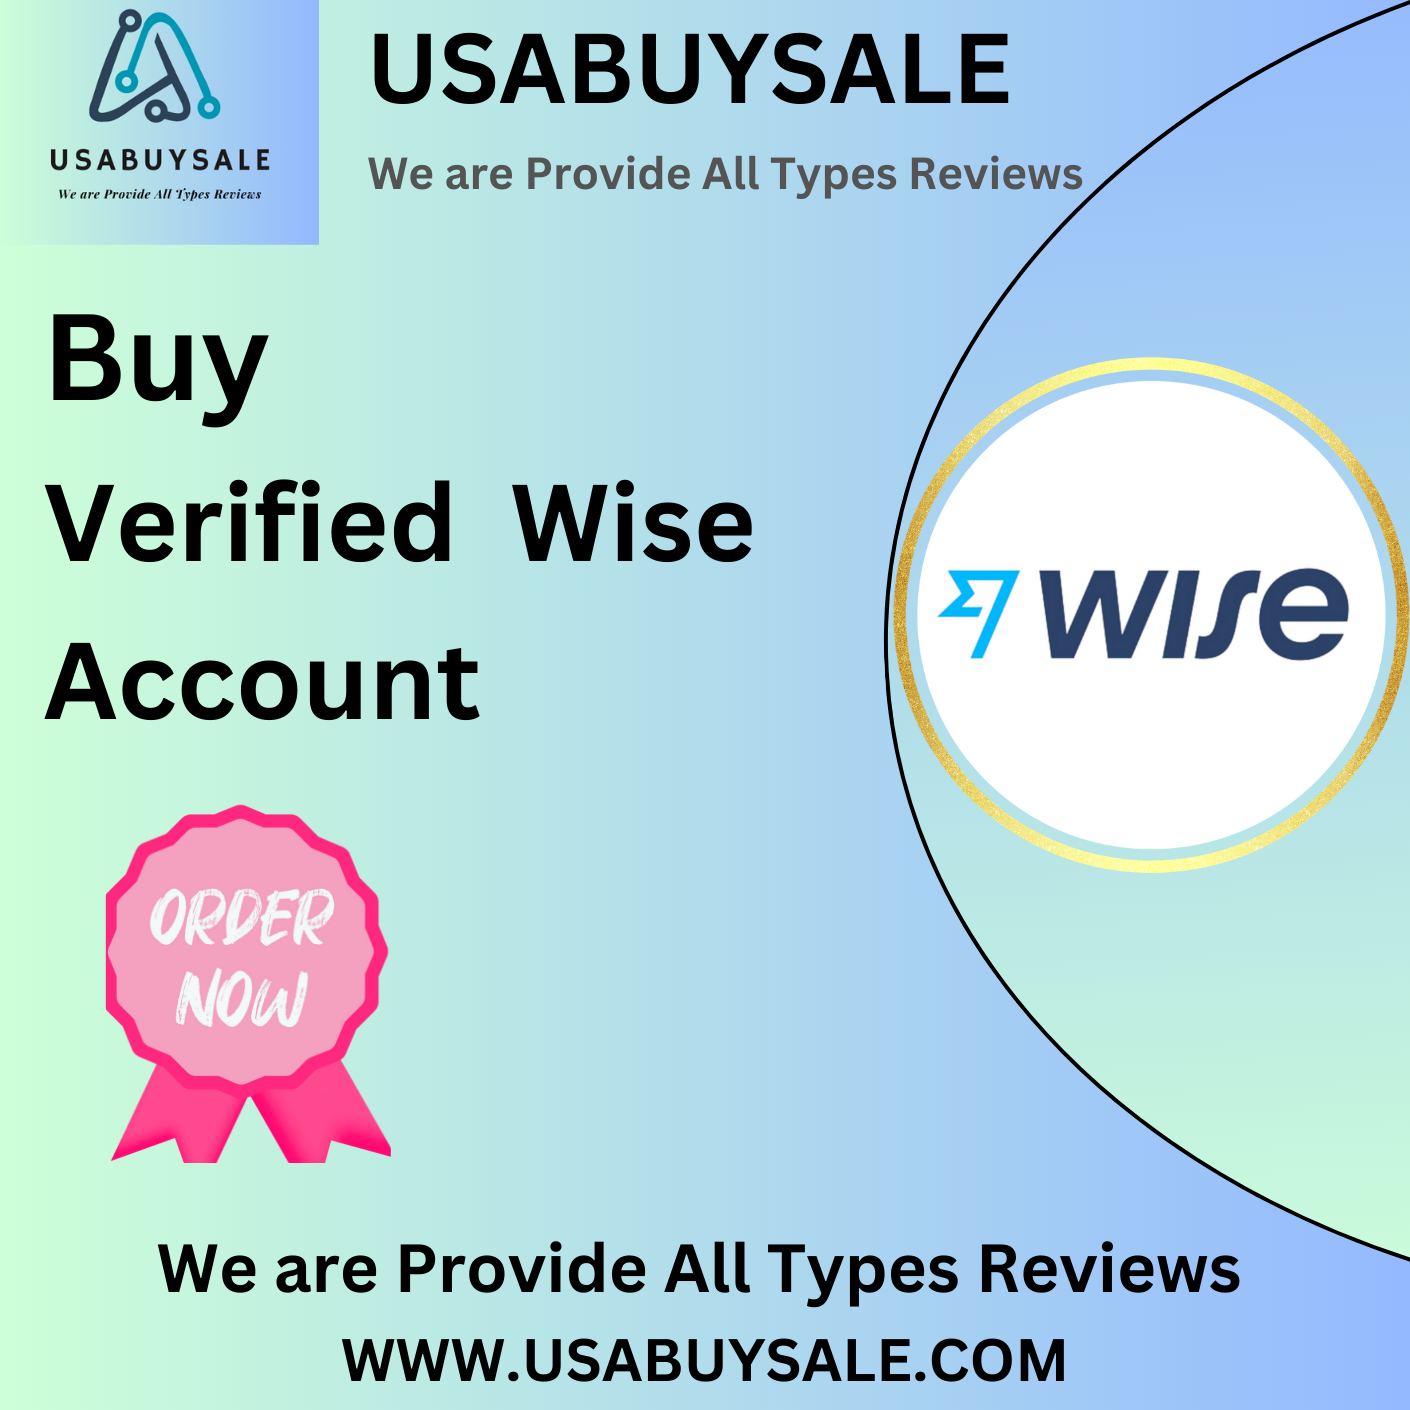 Buy Verified Wise Account - Business and Personal Wise